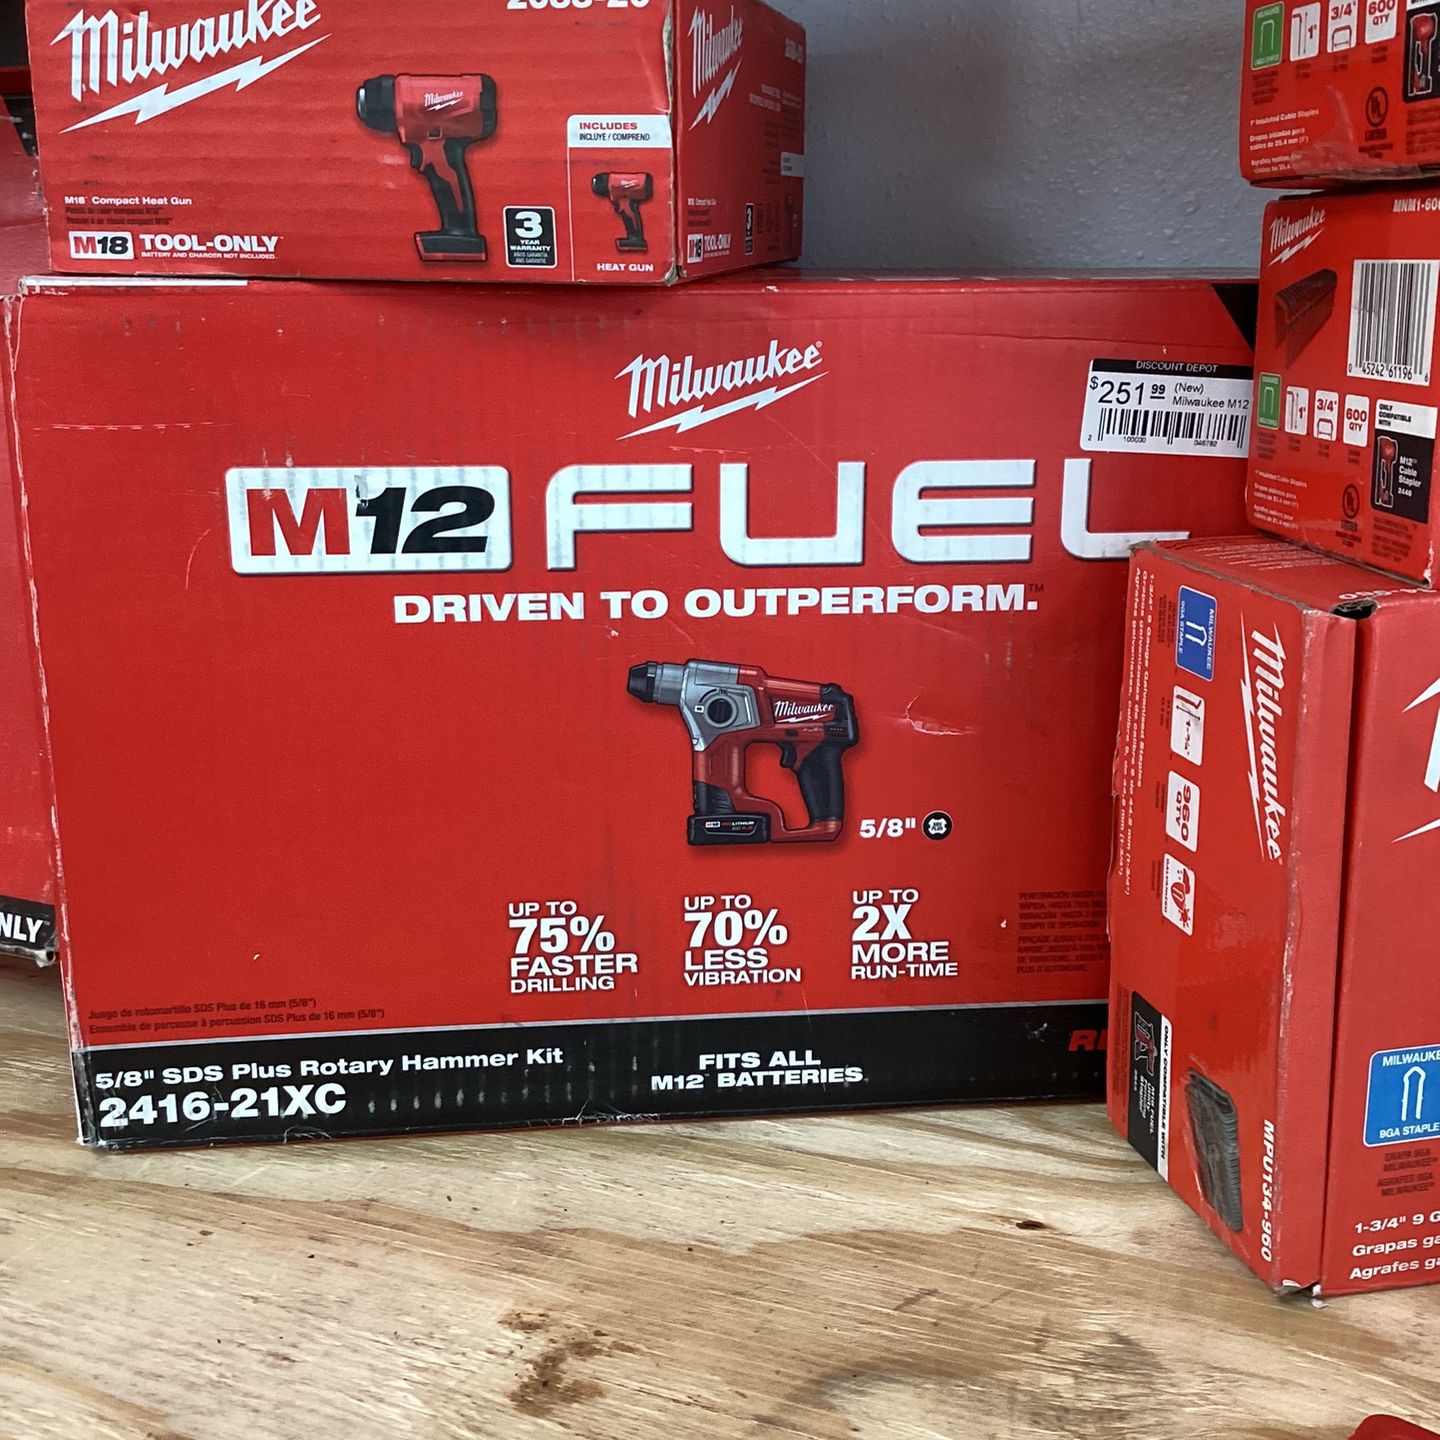 Milwaukee M12 FUEL 12-Volt Lithium-Ion Brushless Cordless 5/8 in. SDS-Plus  Rotary Hammer Kit with One 4.0Ah Battery and Bag for Sale in Phoenix, AZ  OfferUp